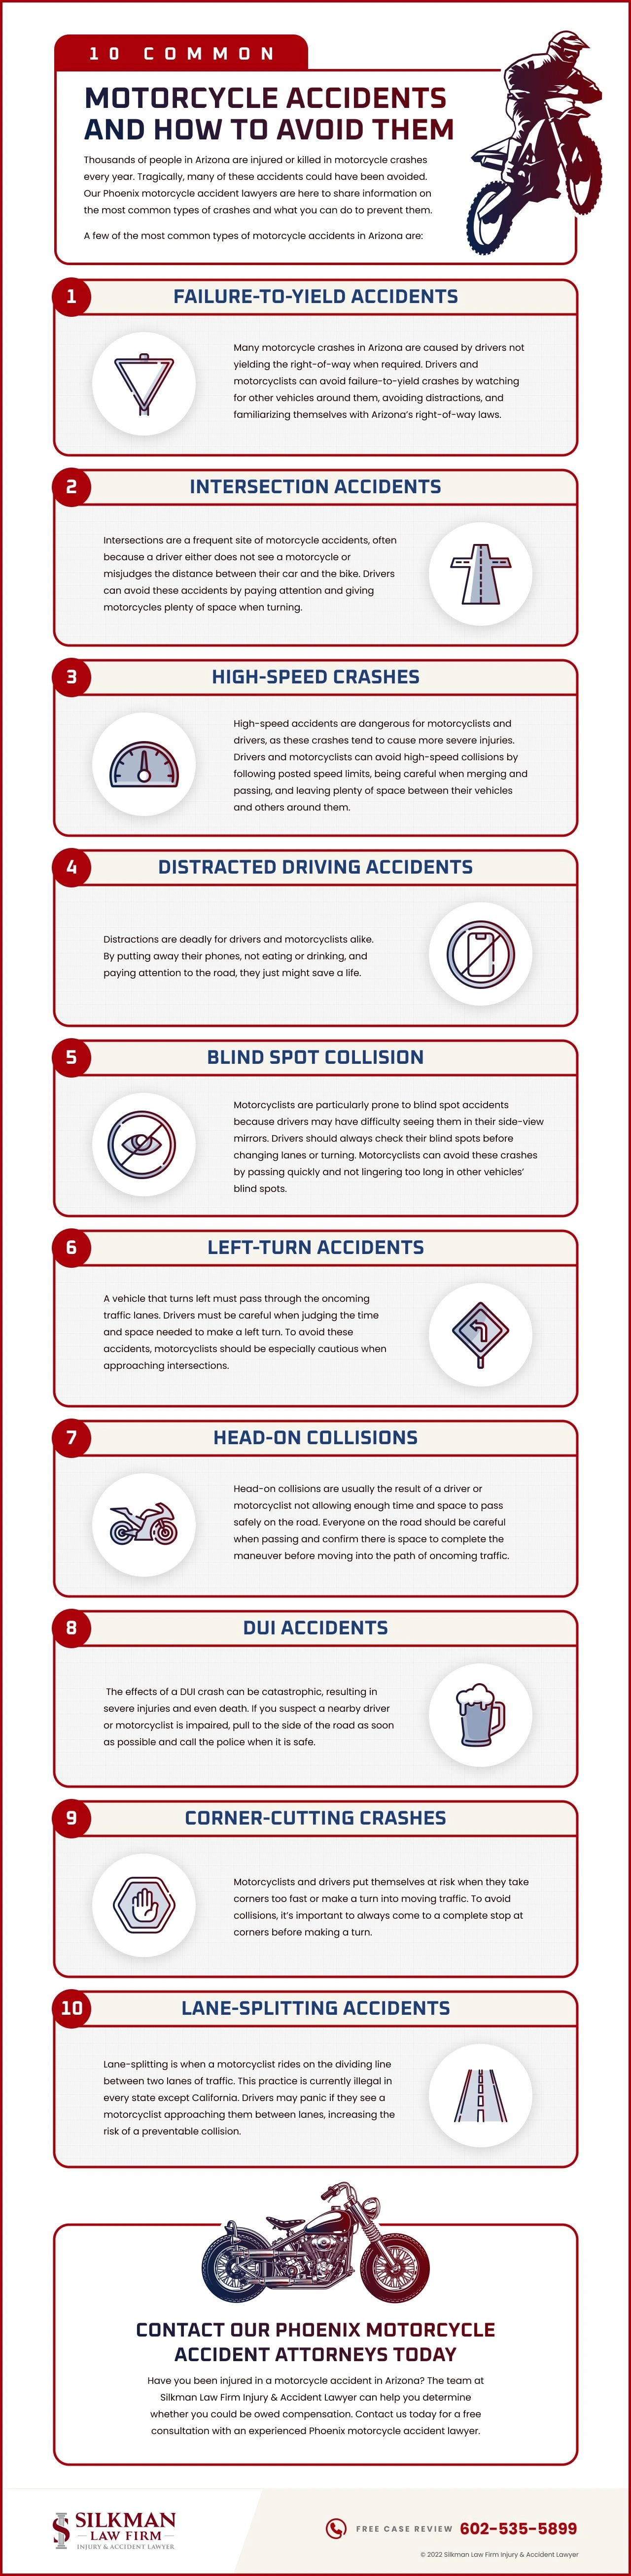 10-Common-Motorcycle-Accidents-and-How-to-Avoid-Them.jpg  by silkmanlawfirm